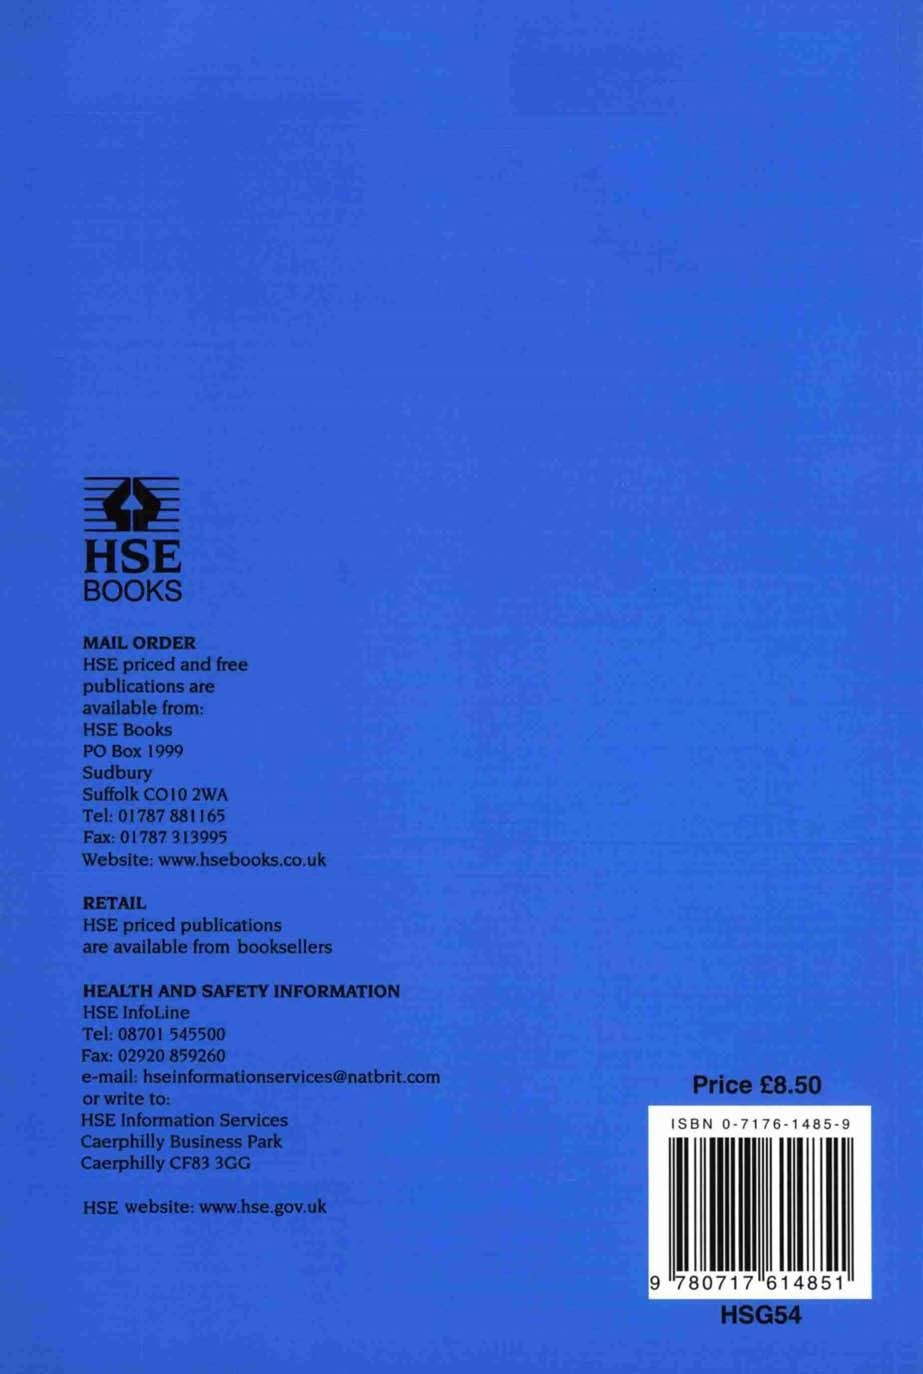 Egki HSE BOOKS MAIL ORDER HSE priced and free publications are available from: HSE Books PO Box 1999 Sudbury Suffolk CO10 2WA Tel: 01787 881 165 Fax: 01 787 3 13995 Website: www.hsebooks.co.